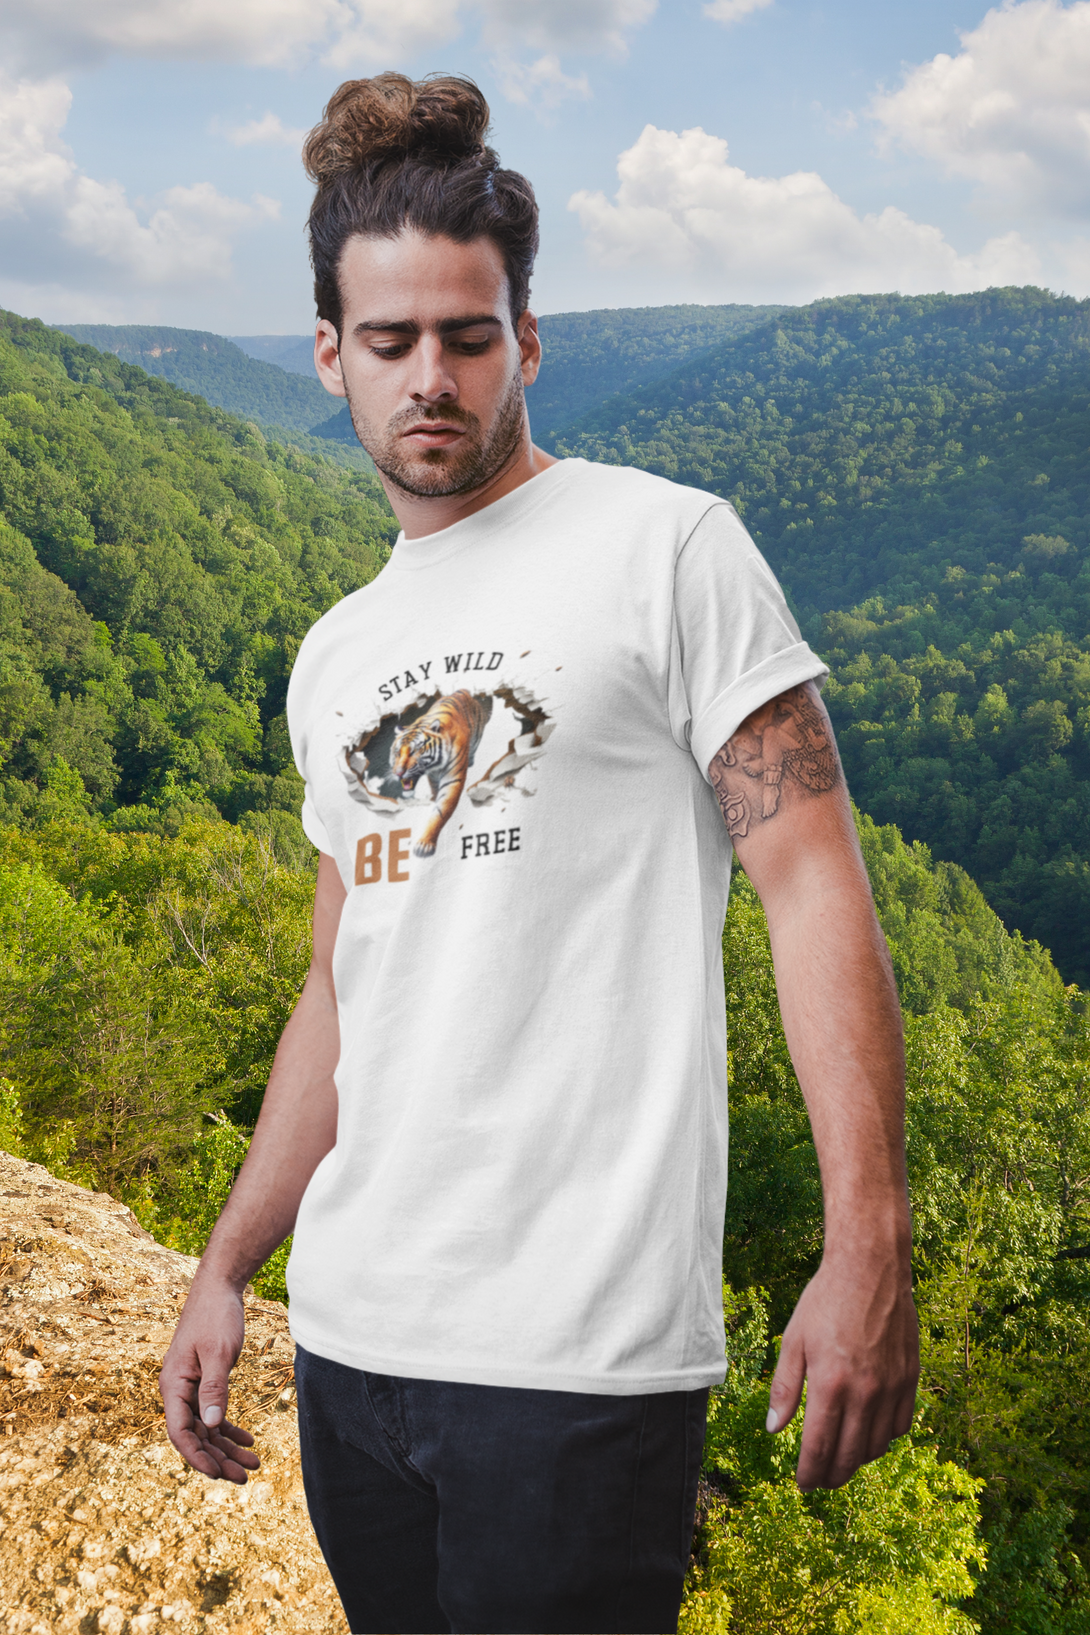 Stay Wild And Be Free Printed T-Shirt For Men - WowWaves - 4